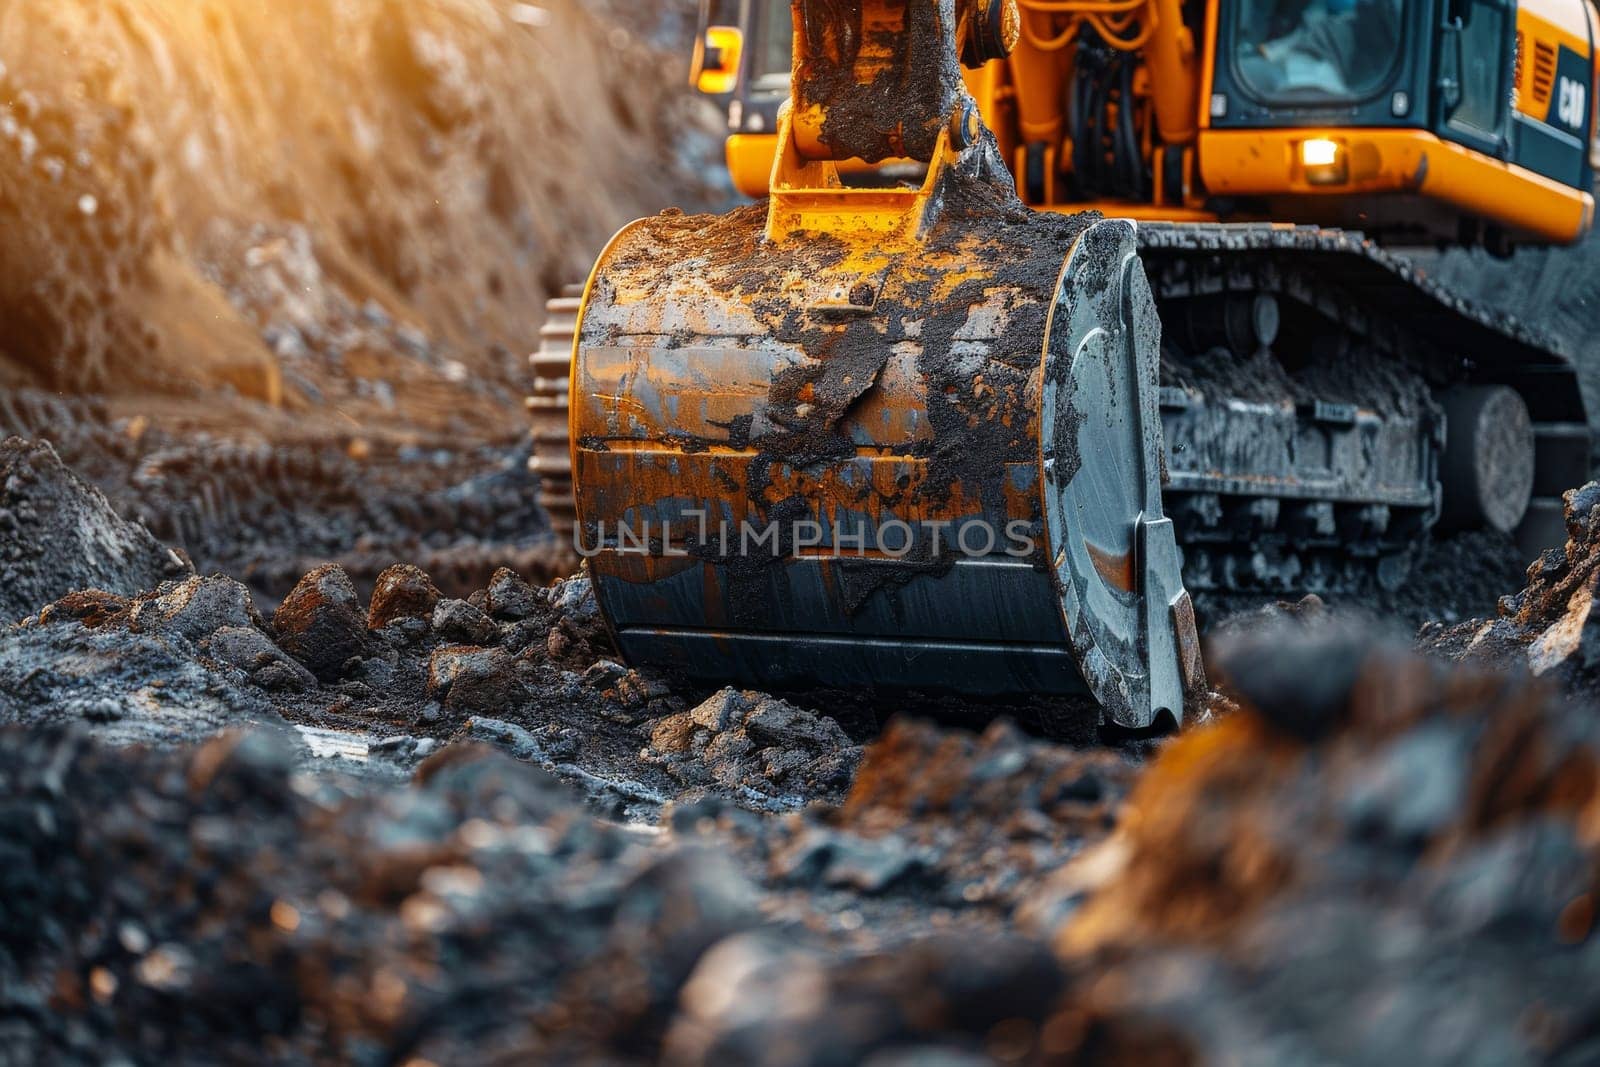 A dirty orange construction vehicle with mud on its tracks.